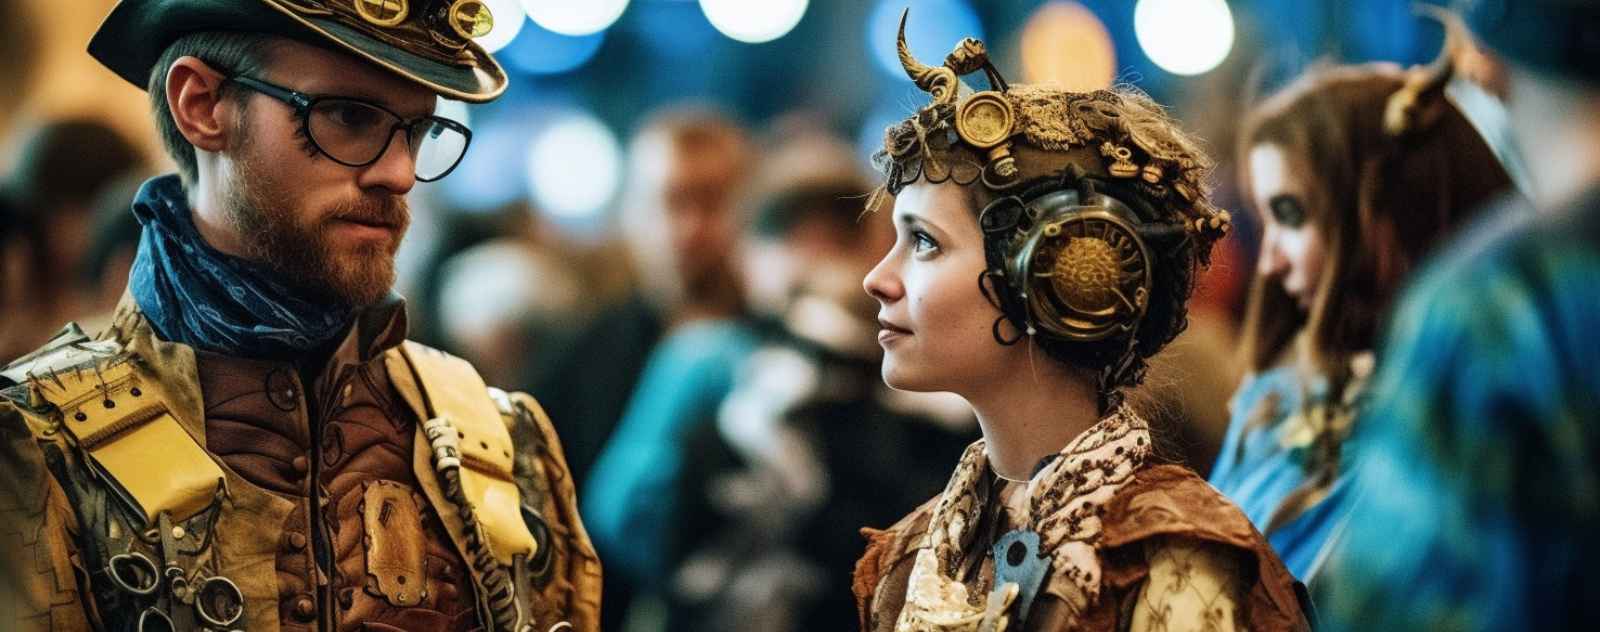 Le Cosplay Steampunk